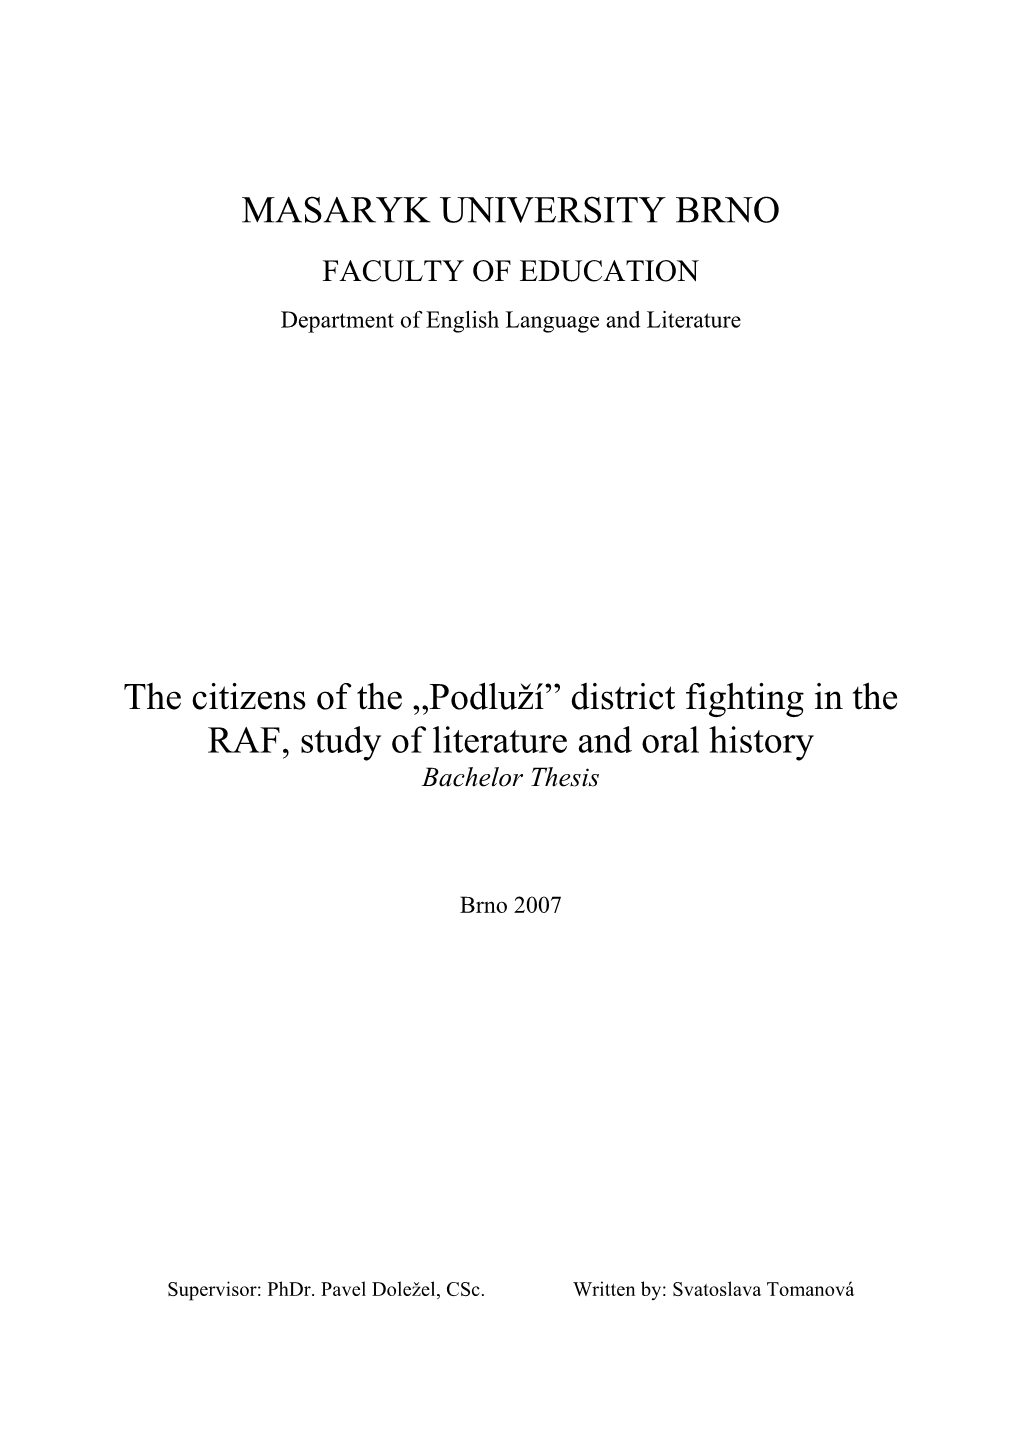 „Podluží” District Fighting in the RAF, Study of Literature And